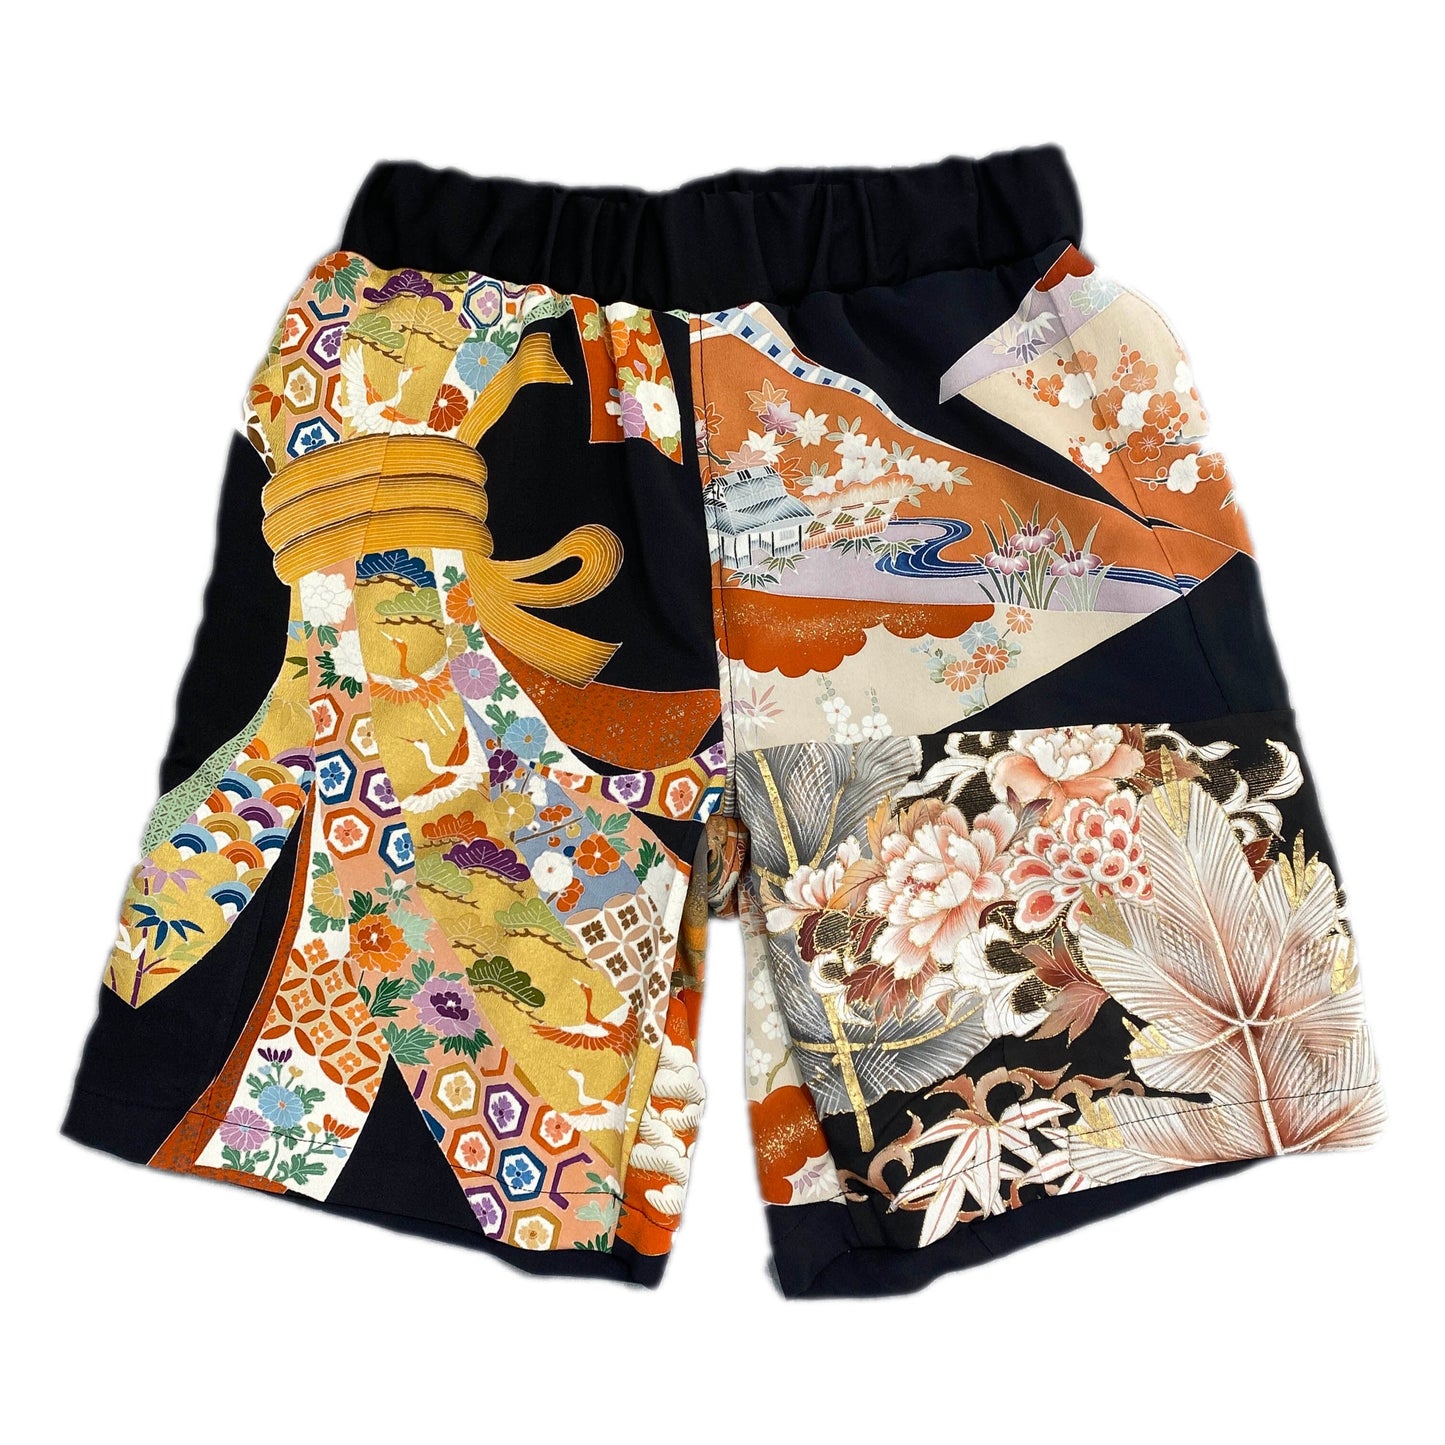 Baggy Hiphop Loose Bespoke Hypebeast Japanese Vintage Handmade Custom One and Only One Cote Mer Upcycle Sustainable Upscale Street Fashion Embroidered Embroidery Kimono  Remake Half Pants Shorts Bottoms ( Size : XL )